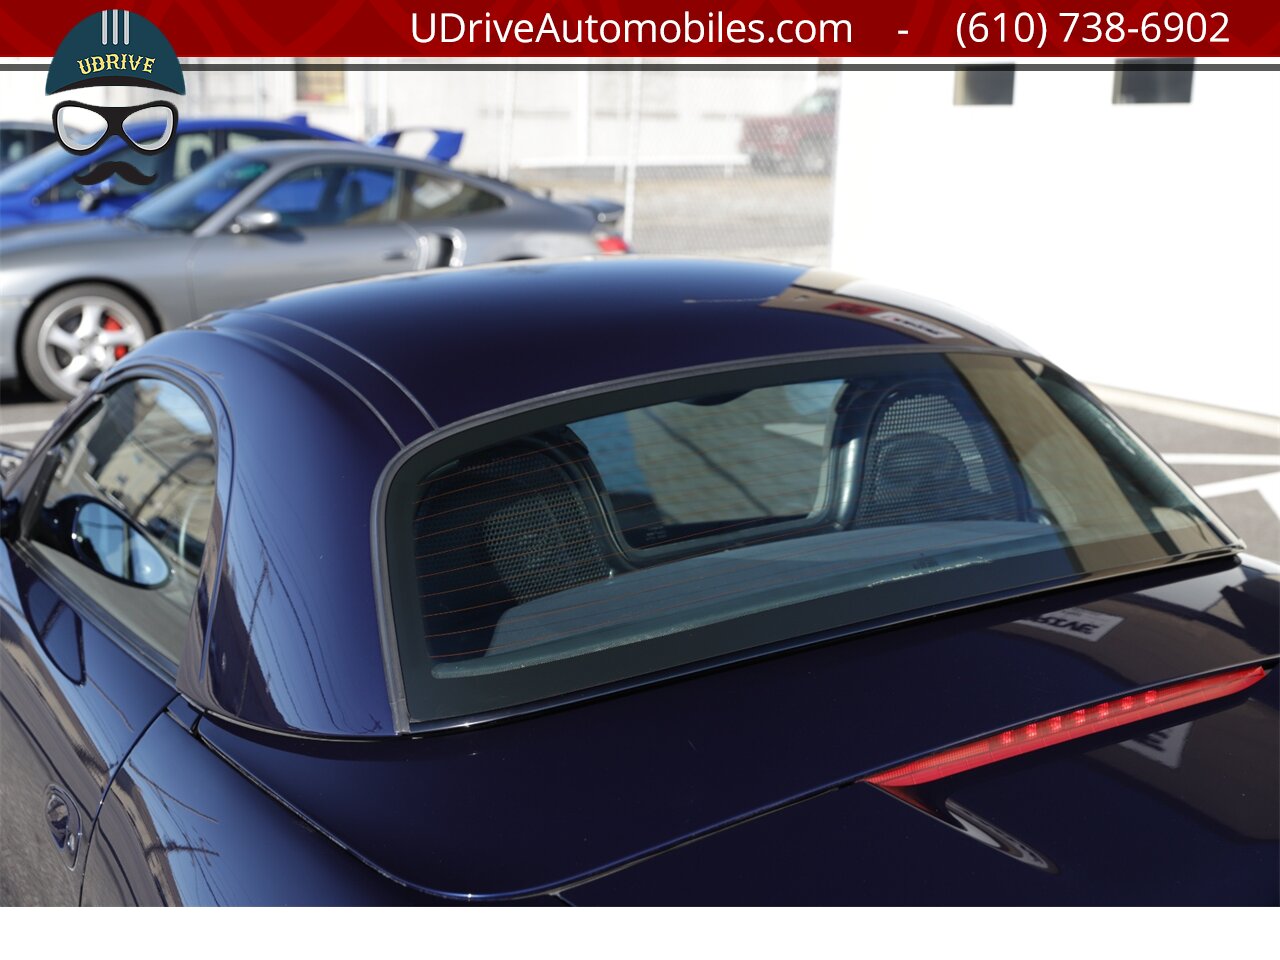 2001 Porsche Boxster 5 Speed Manual Detailed Service History  Same Owner for Last 18 Years Hard Top Included - Photo 22 - West Chester, PA 19382